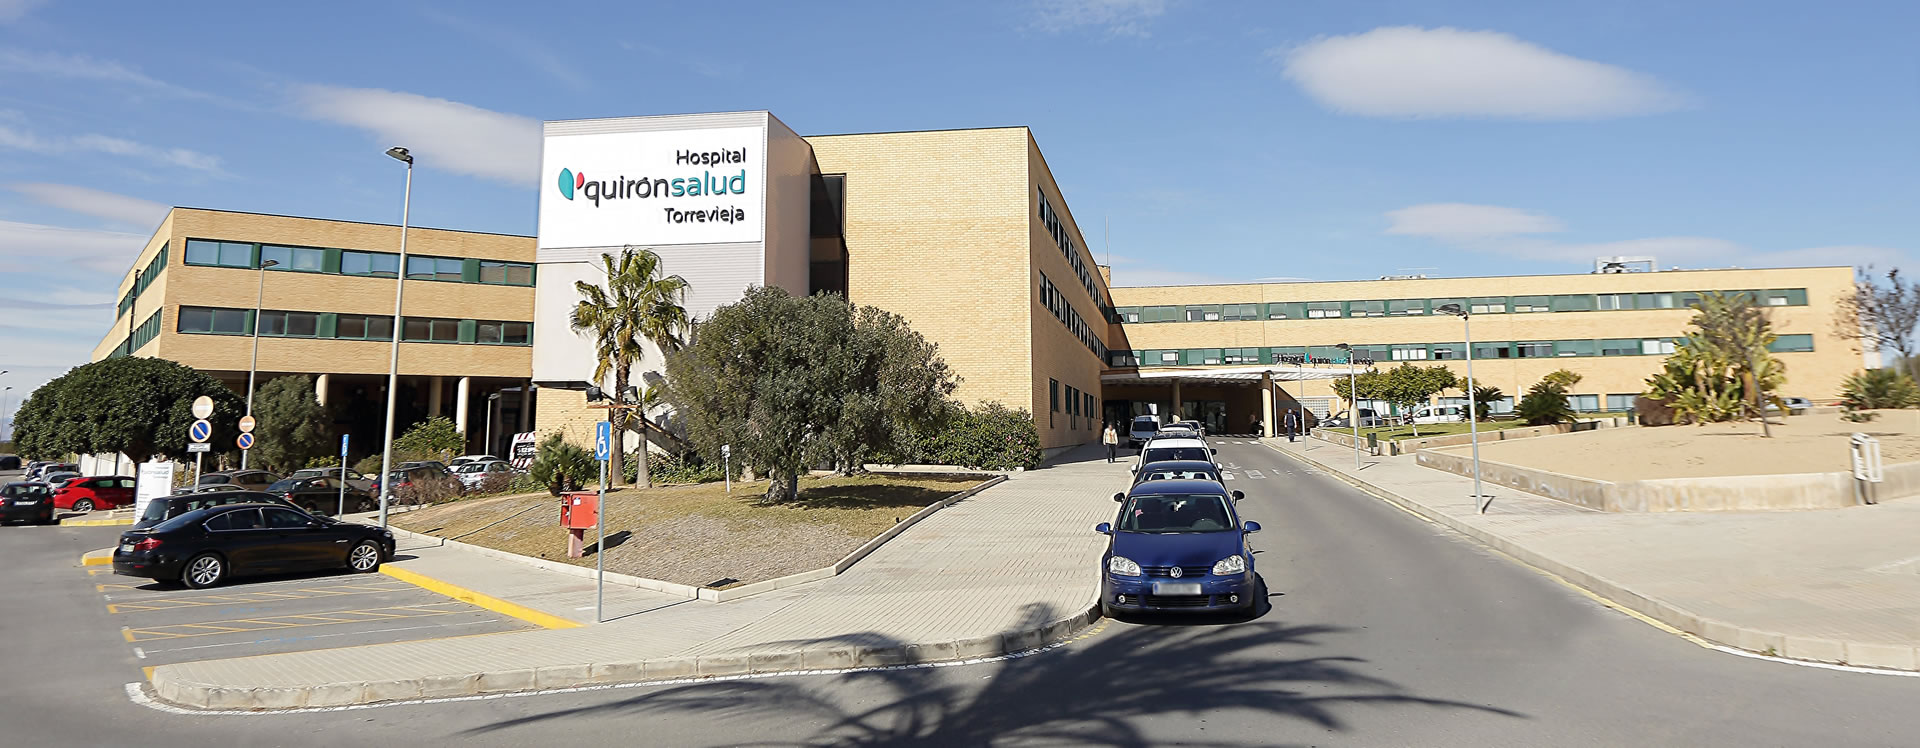 Outdoors of Hospital Quirónsalud Torrevieja where Clínica Marta Vallés is located